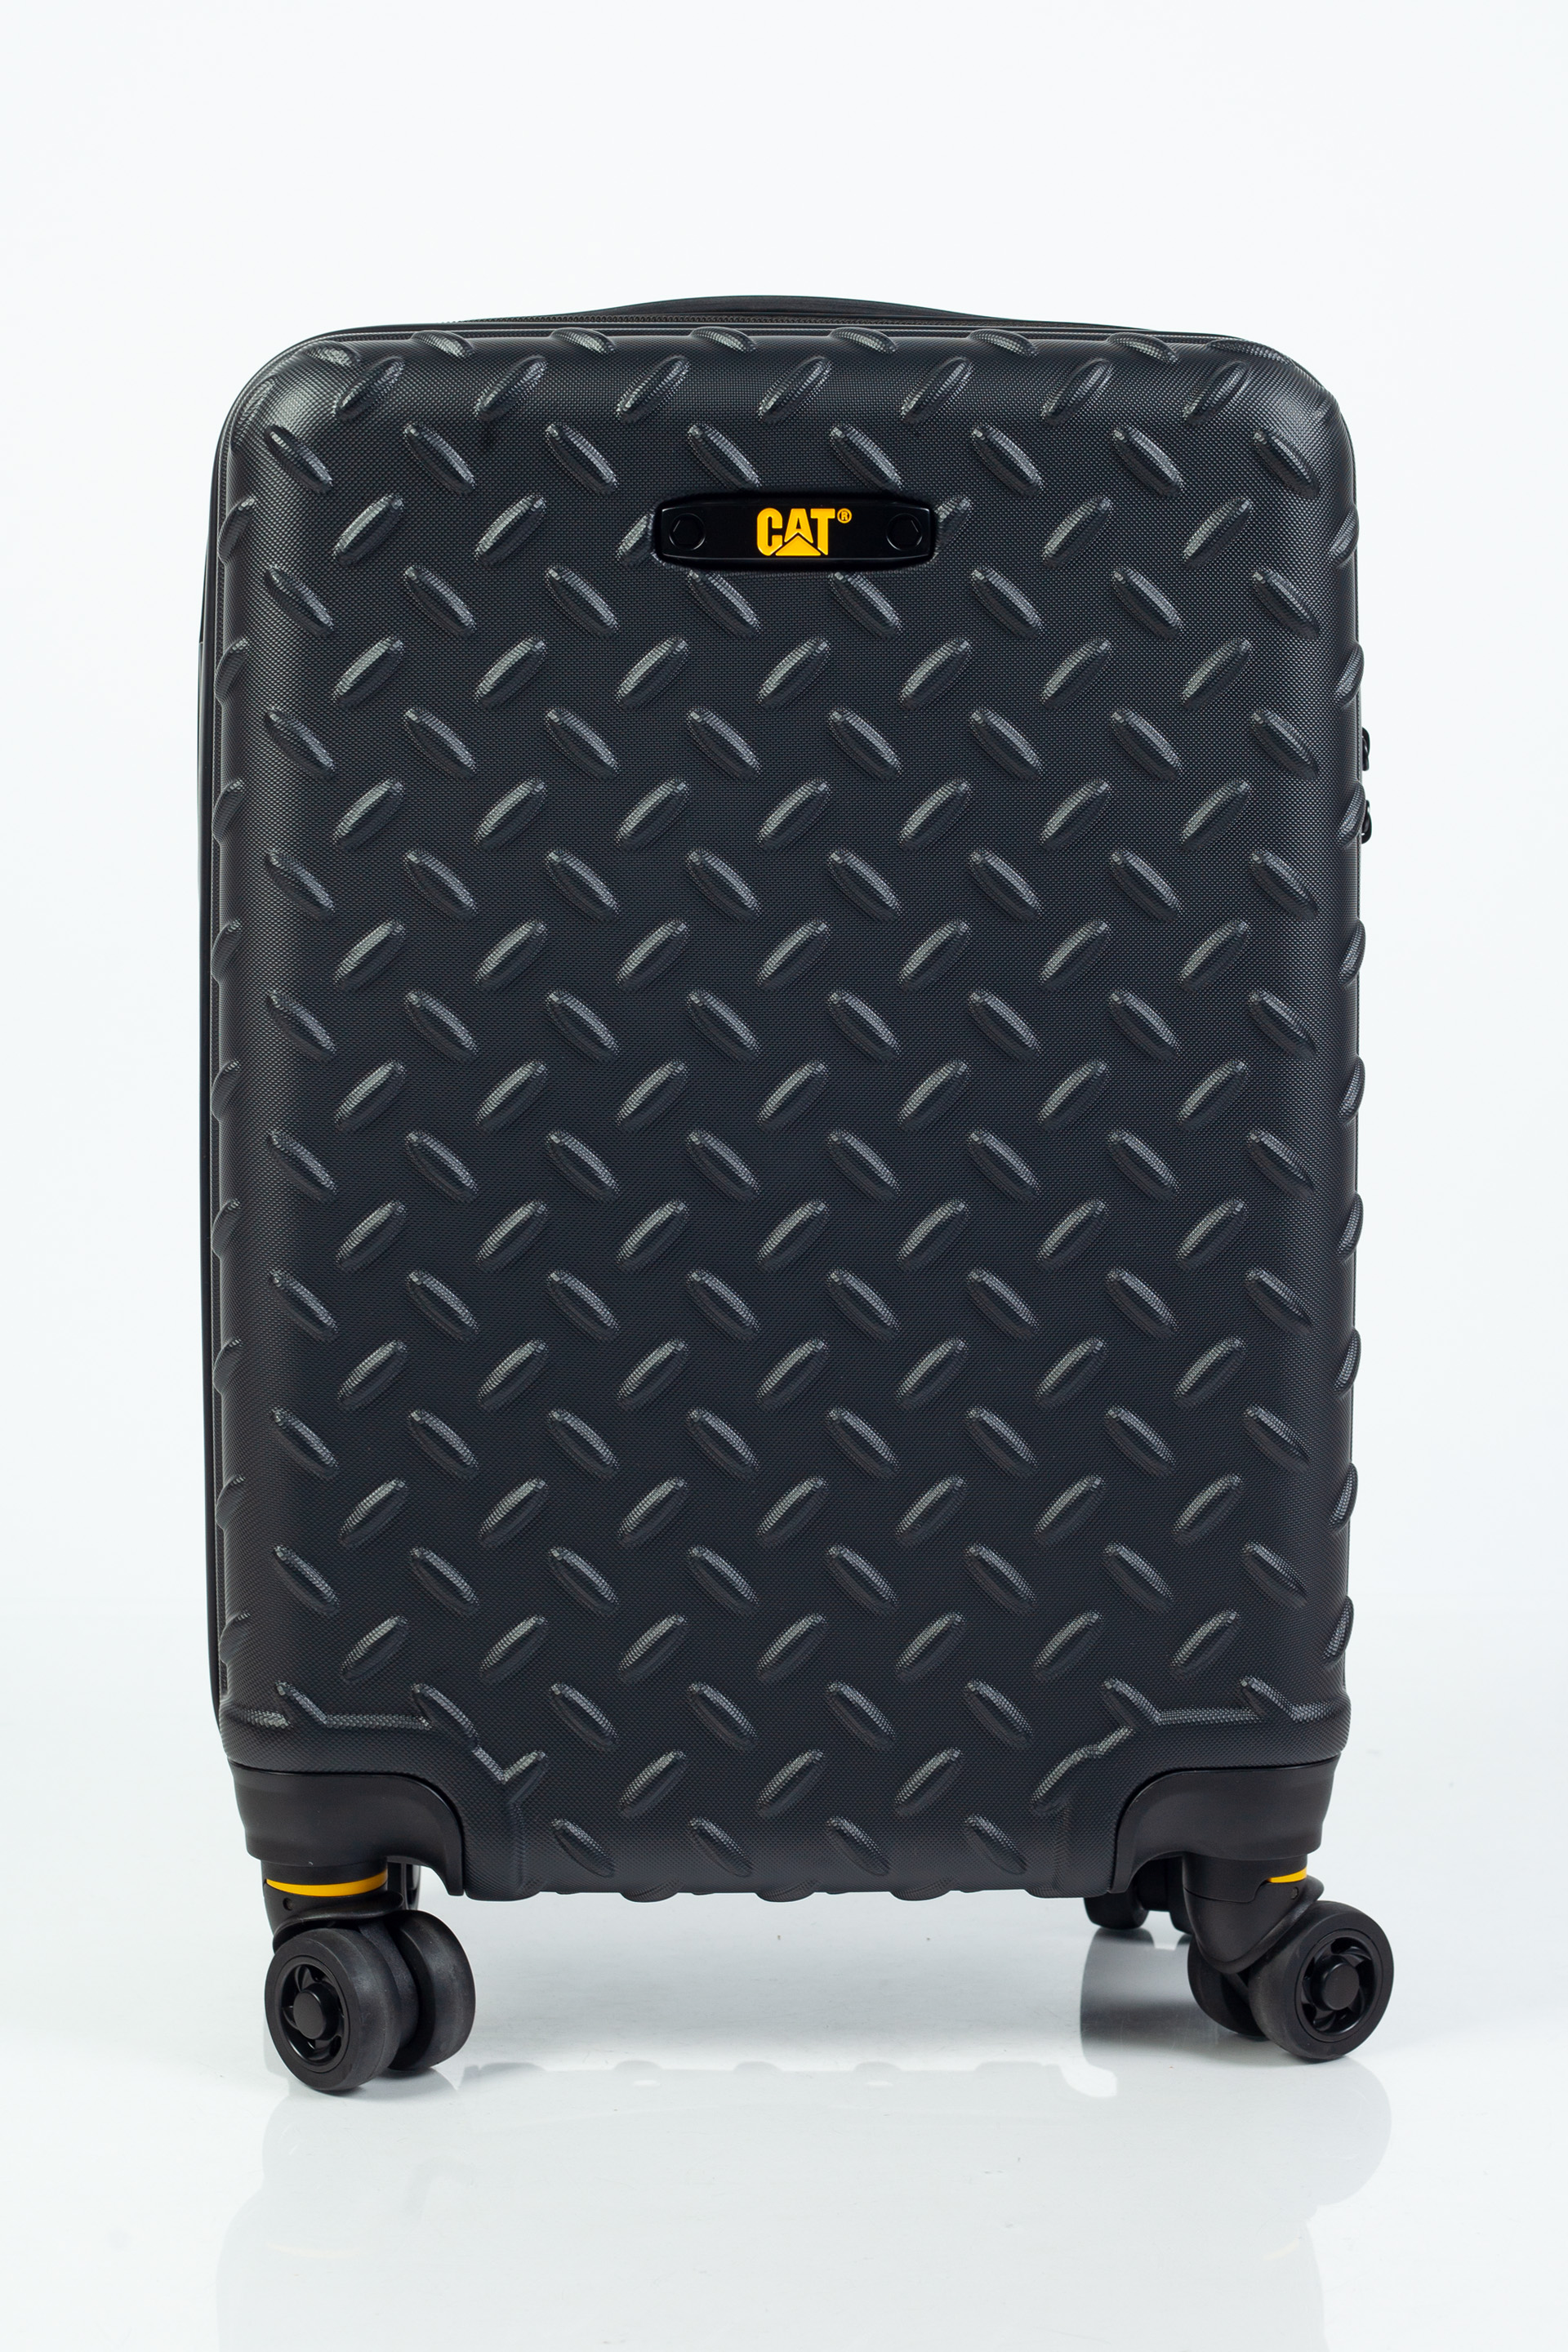 Travel suitcase CAT, small 83552-01